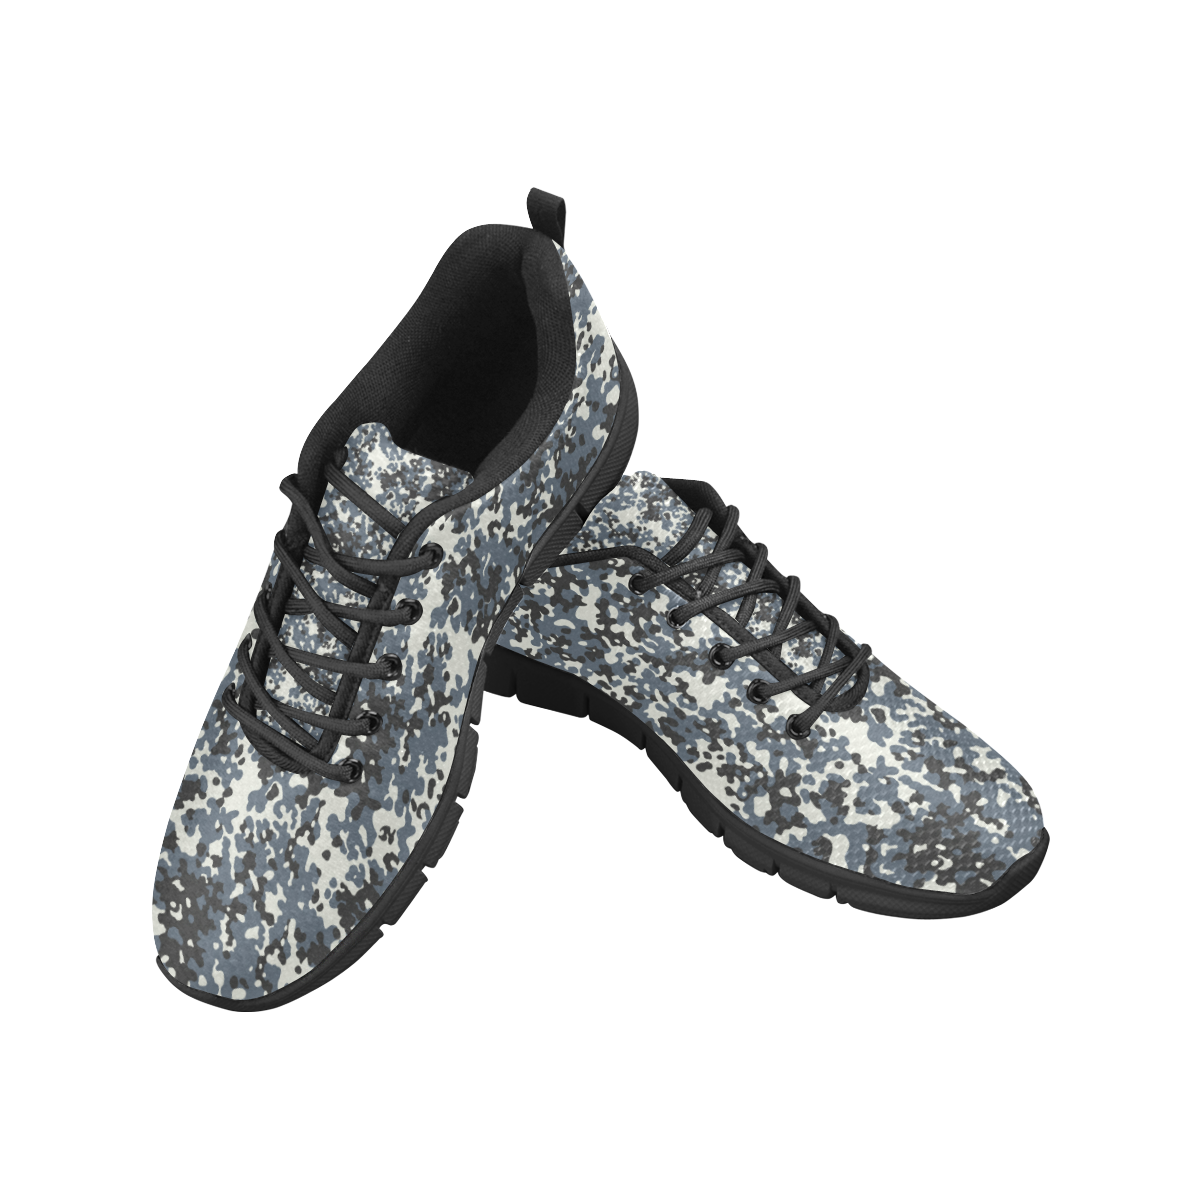 Urban City Black/Gray Digital Camouflage Women's Breathable Running Shoes/Large (Model 055)